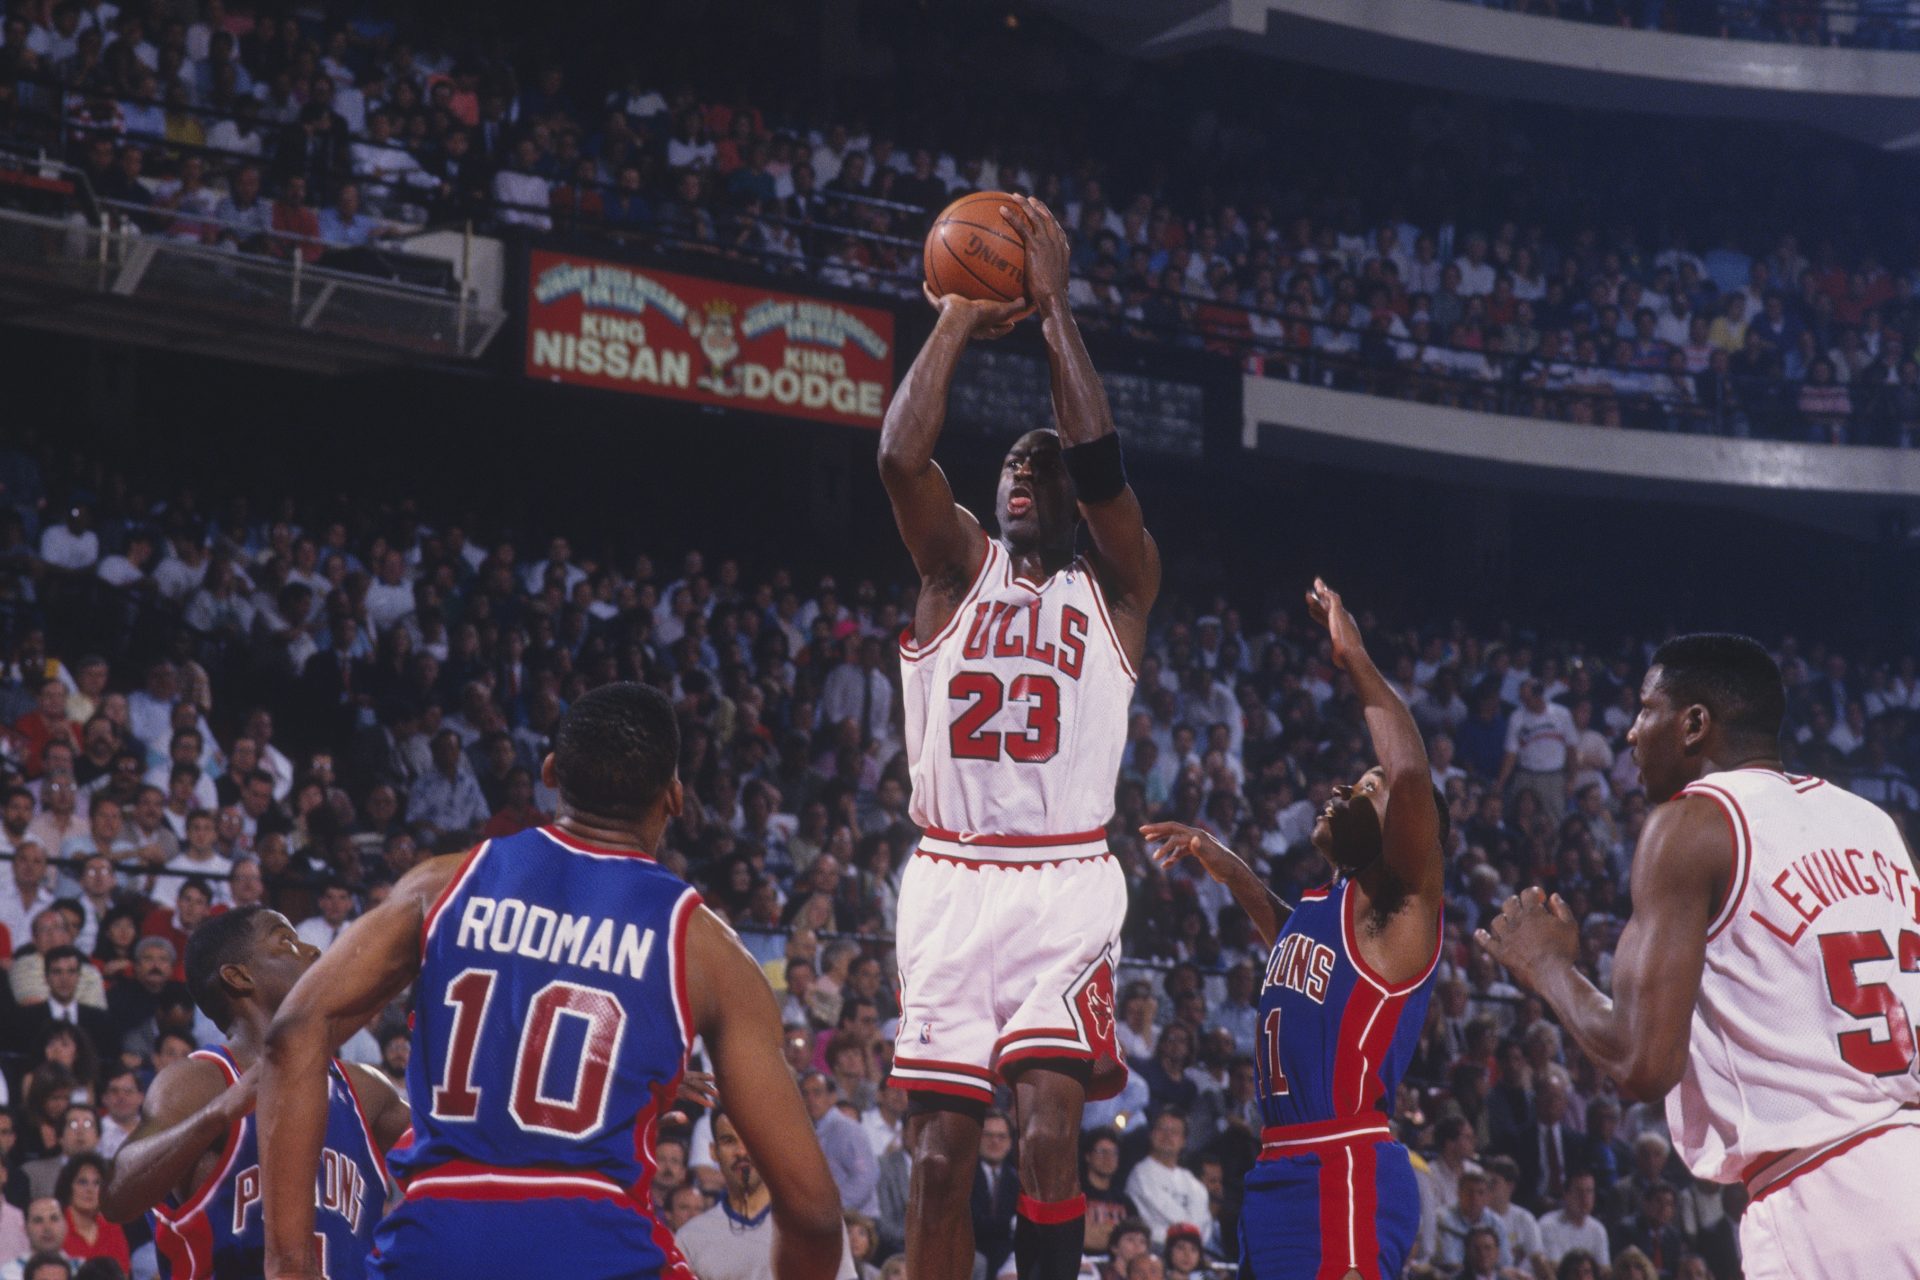 The real story behind Michael Jordan’s enduring hatred for Pistons legend Isiah Thomas